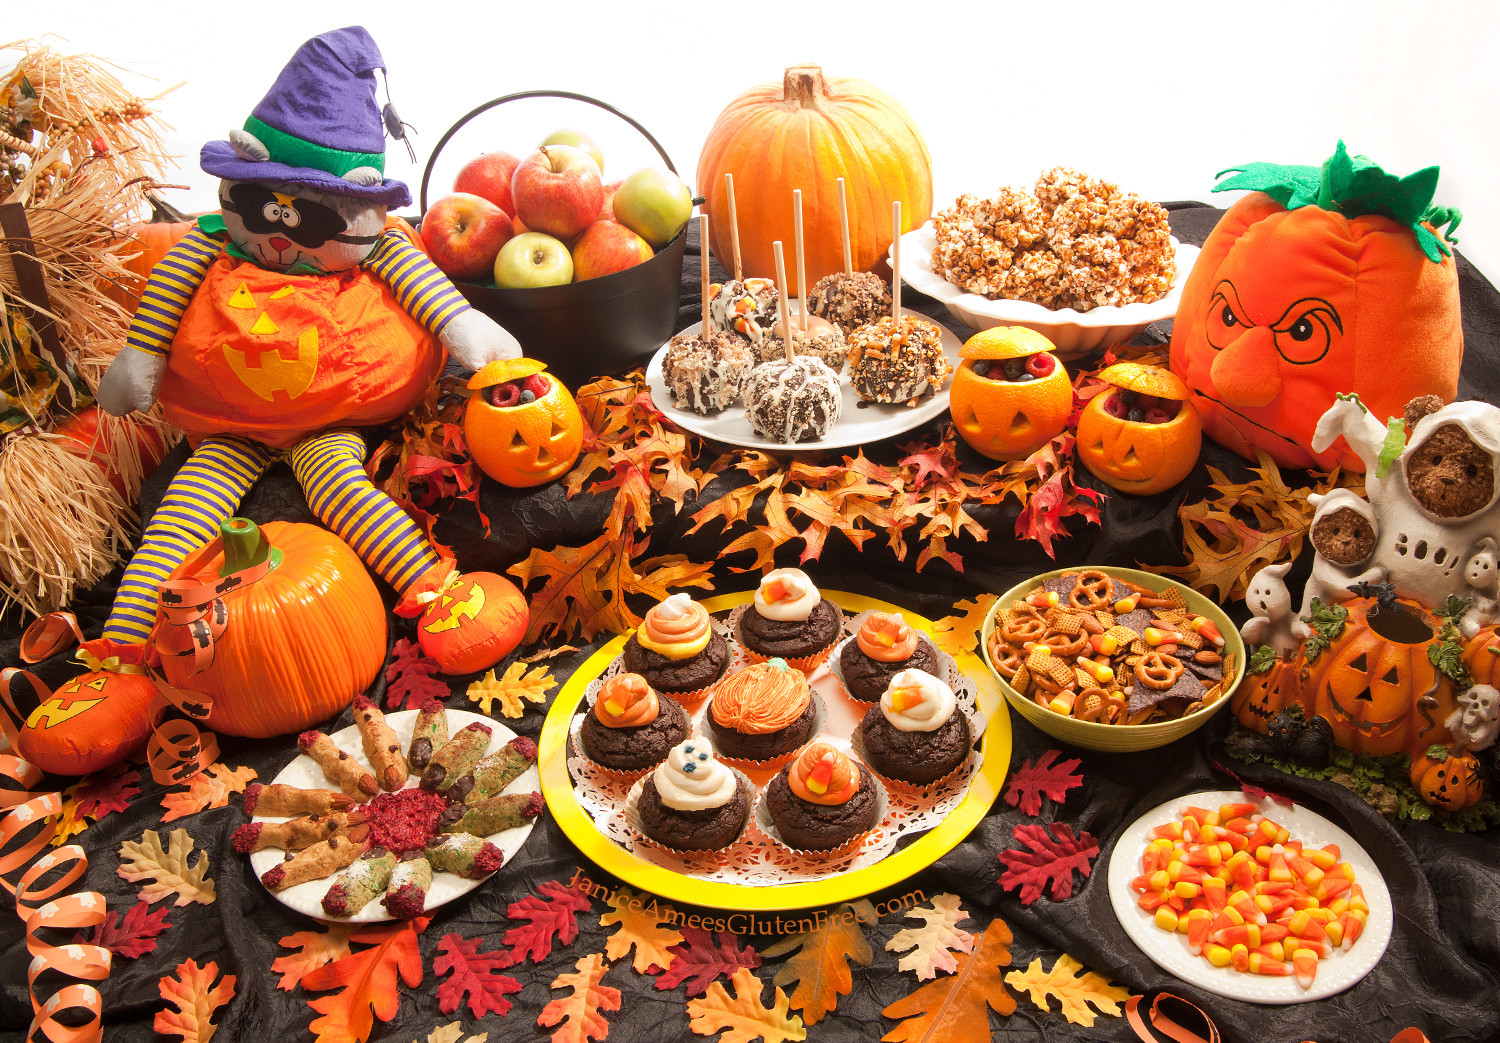 Halloween Food Ideas For A Party
 Top 5 Festive Recipes For Your Halloween Party Top5